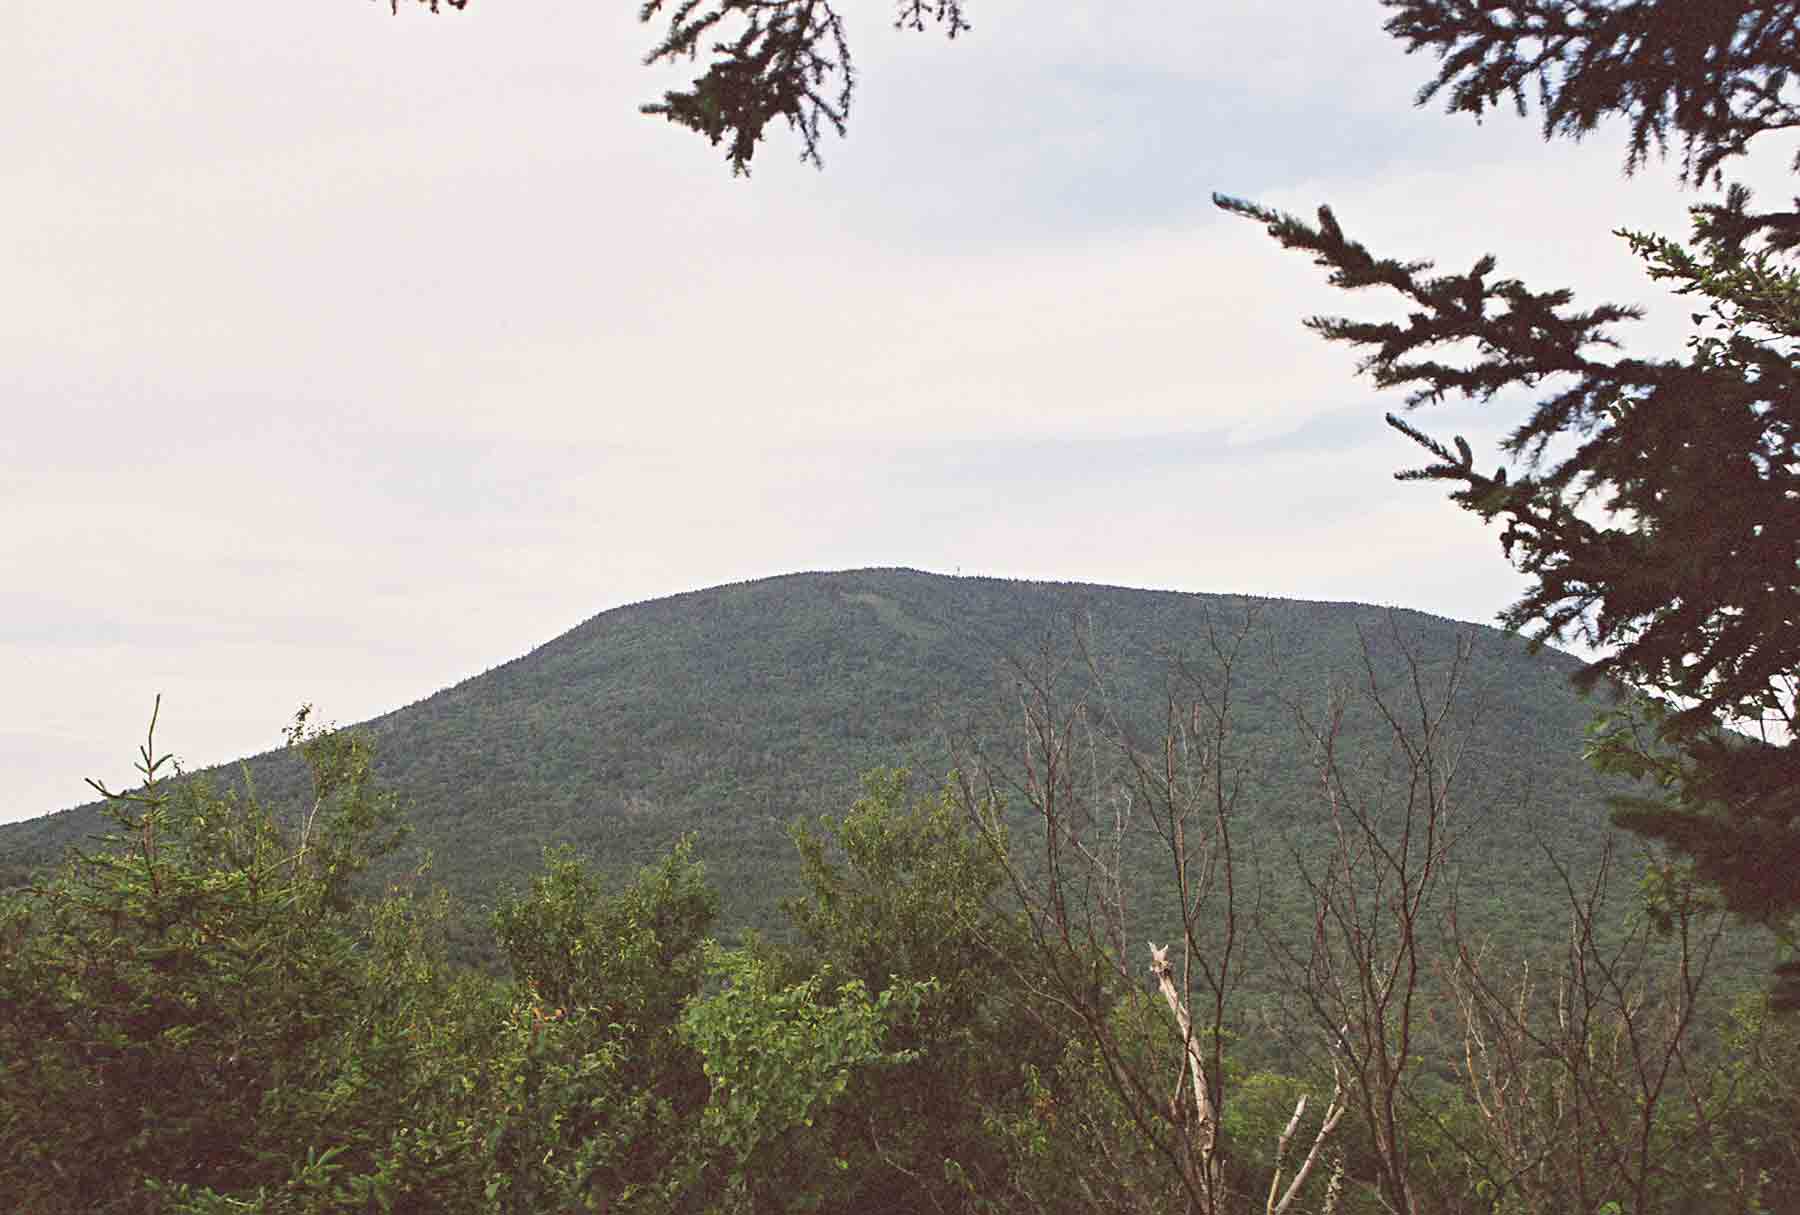 mm 12.2 - View of the steep south face of Smart's Mt. taken from Lamberts Ridge. The firetower can vaguely be seen at the summit.  Courtesy dlcul@conncoll.edu